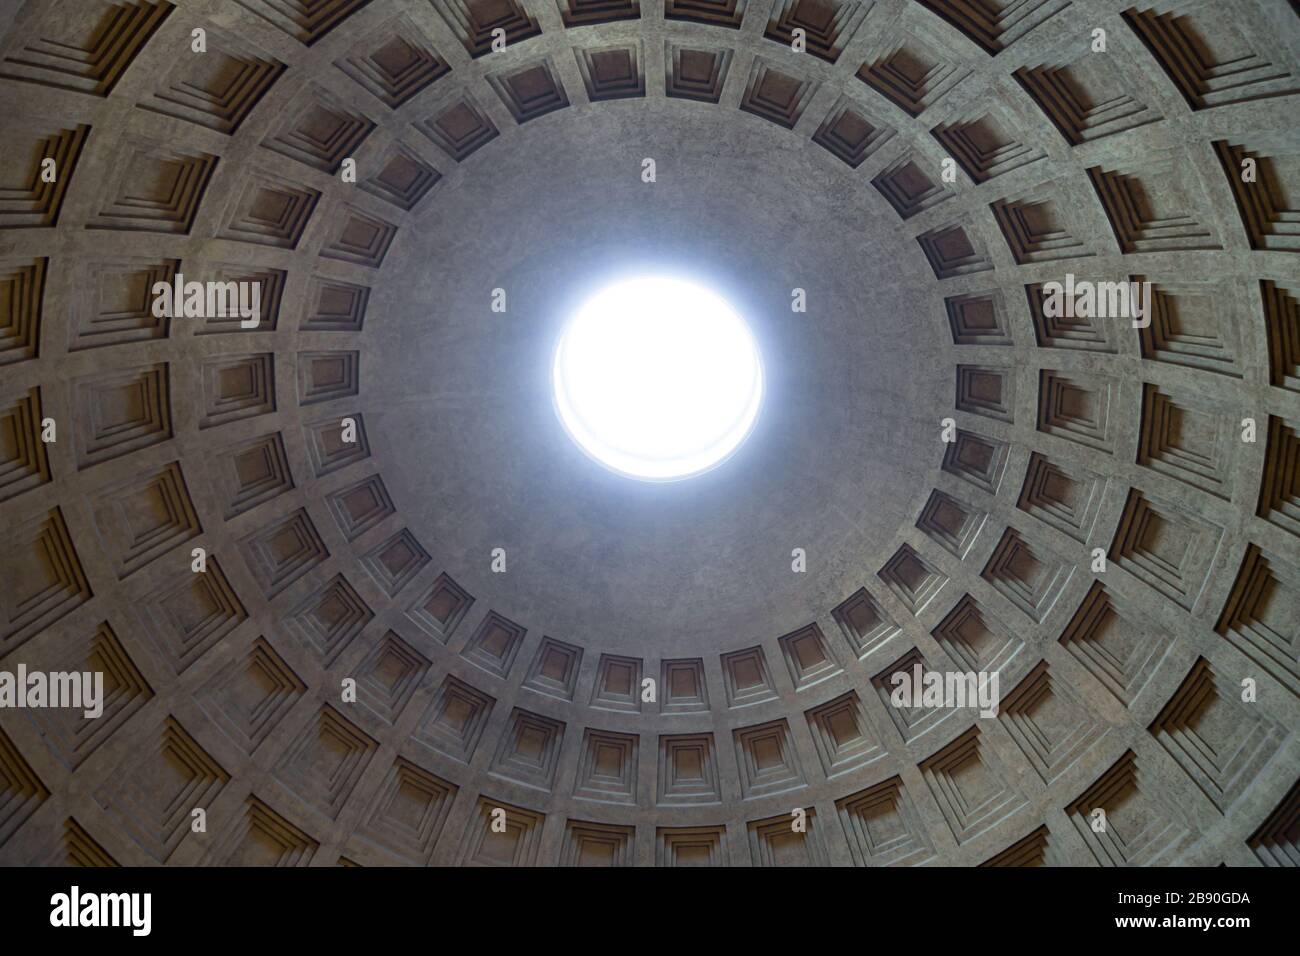 Impressive ancient roof of the Pantheon, a former Roman temple in Rome Italy. Royalty free stock photo. Stock Photo